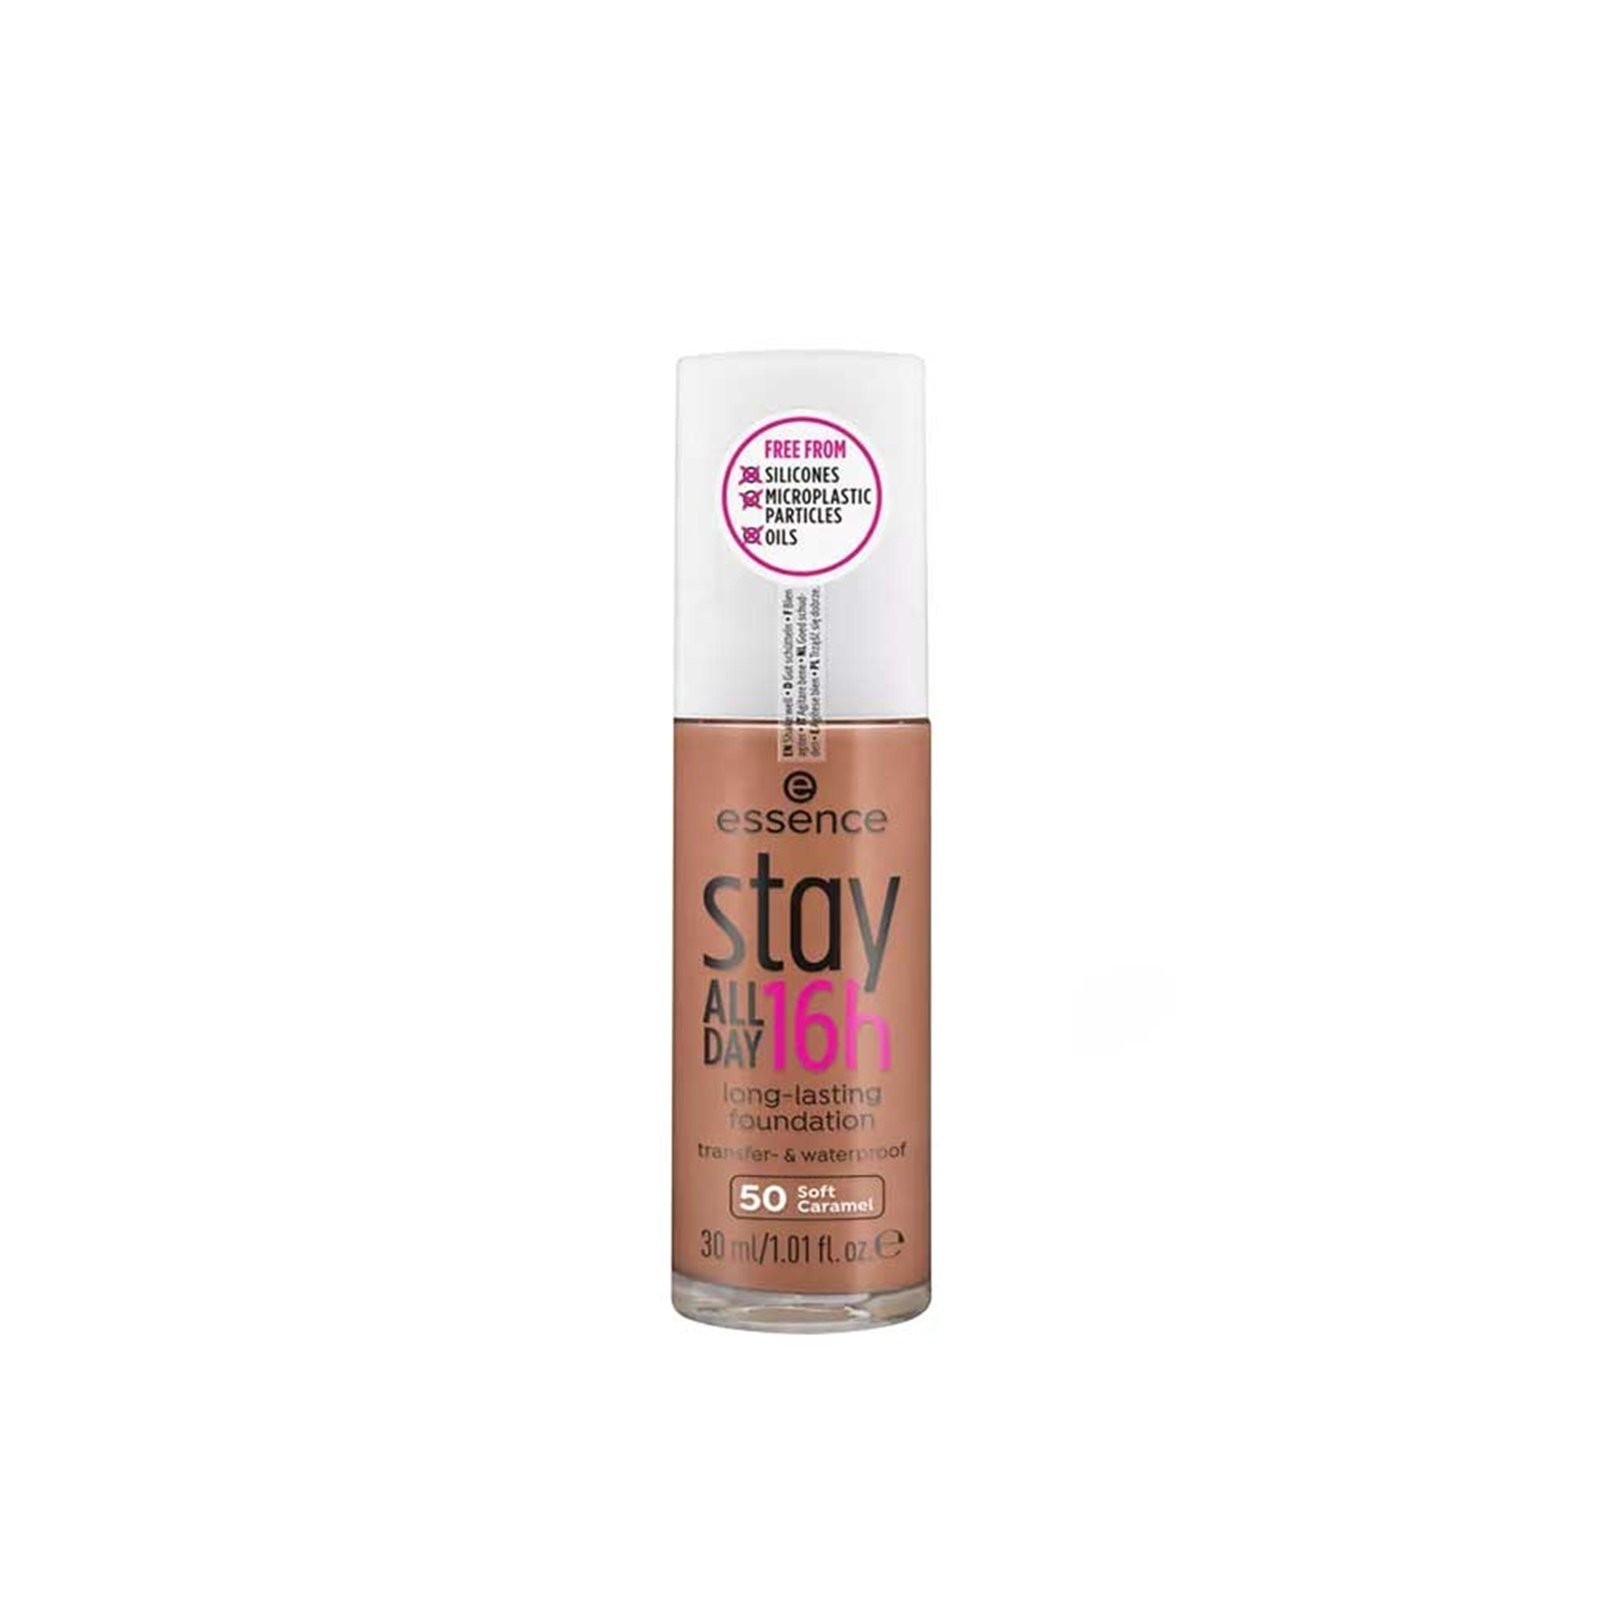 Buy essence Stay All Day USA Long-Lasting Foundation 16h ·